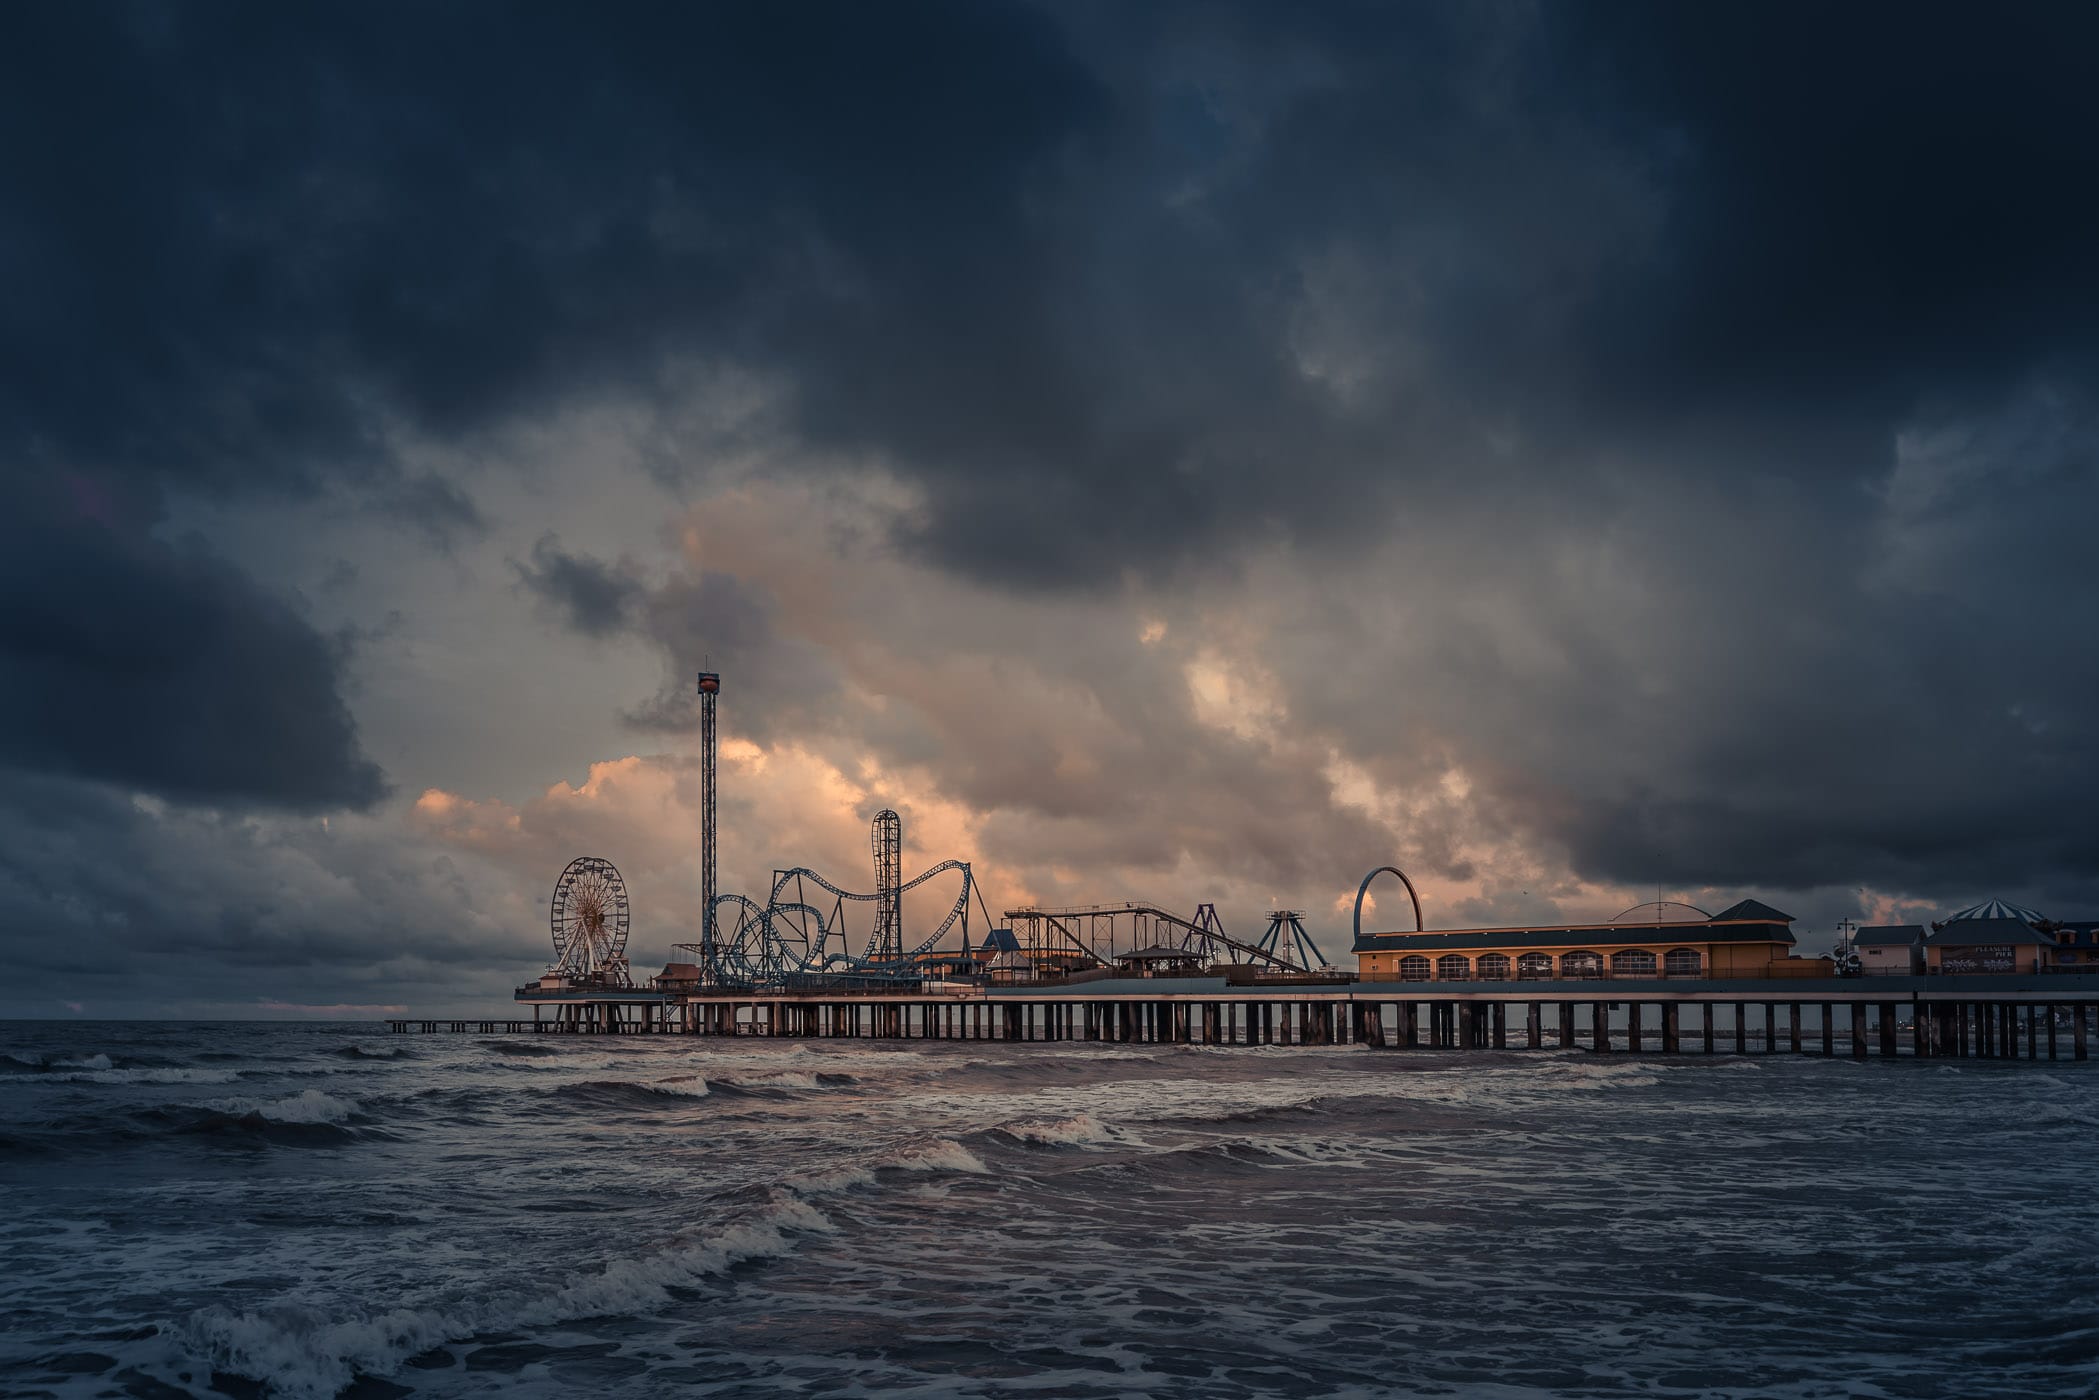 An offshore storm begins to roll in over the Galveston Island Historic Pleasure Pier, Galveston, Texas.